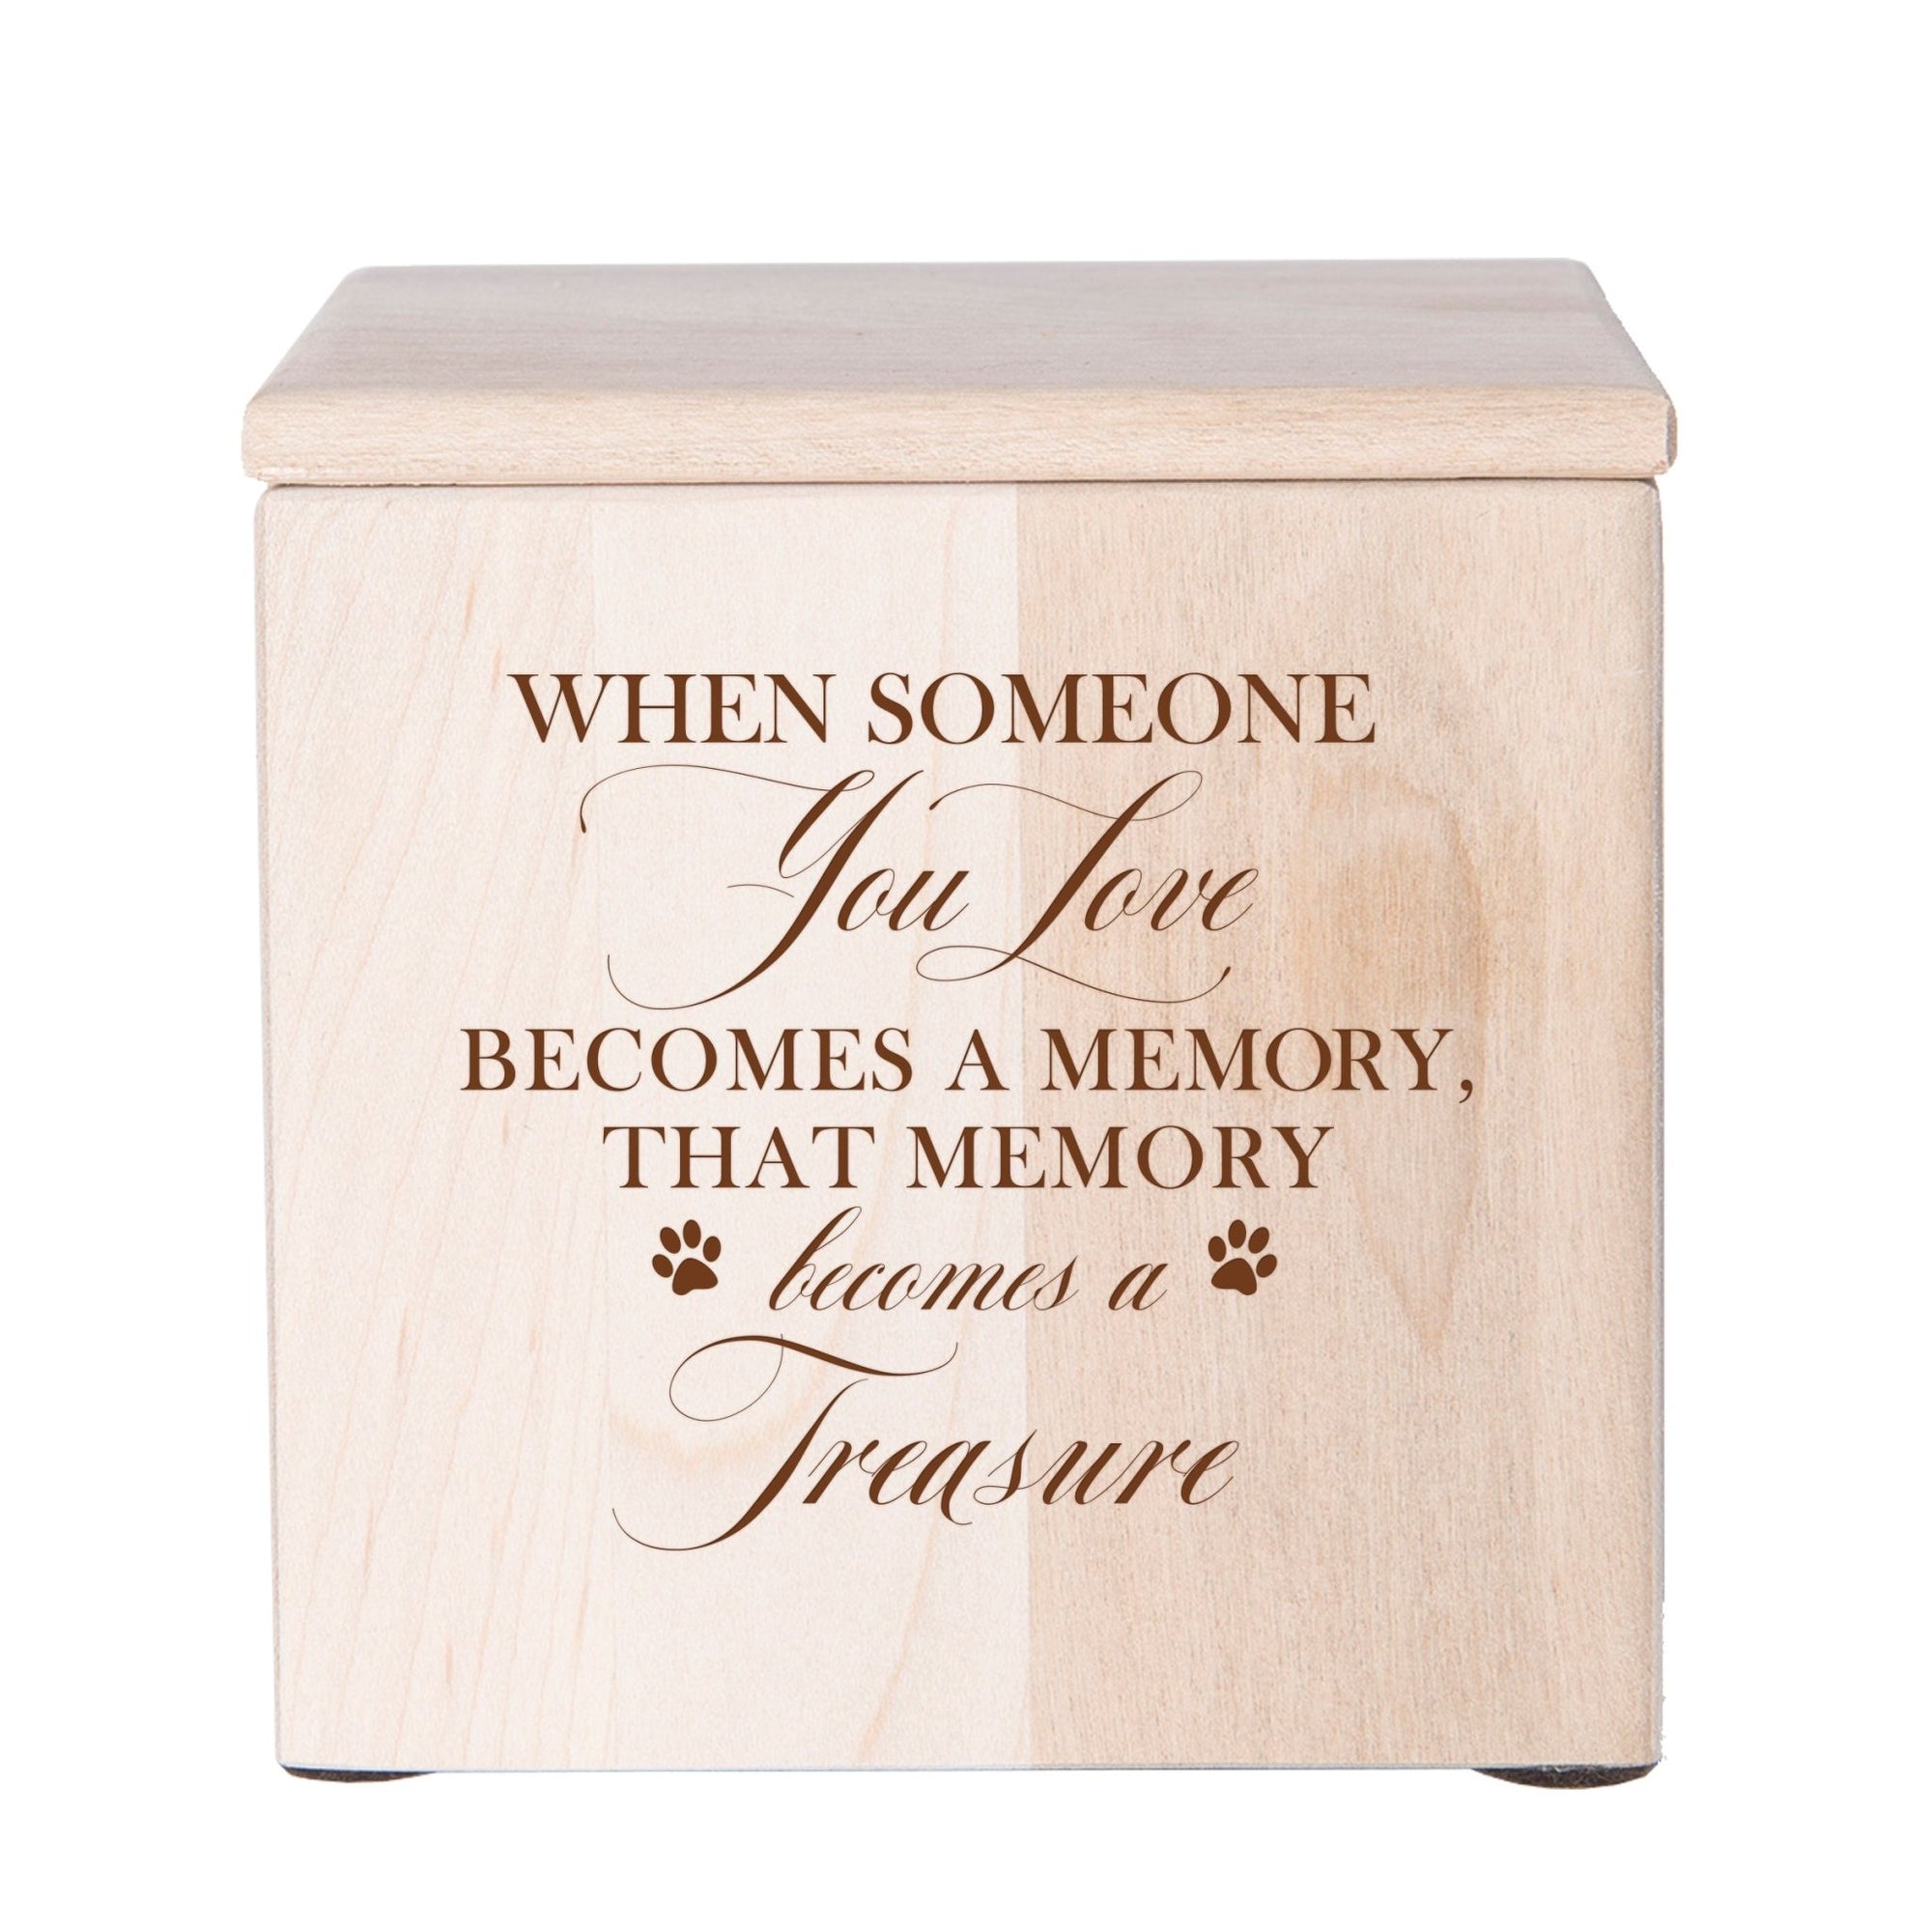 Pet Memorial Keepsake Cremation Urn Box for Dog or Cat - When Someone You Love Becomes A Memory - LifeSong Milestones